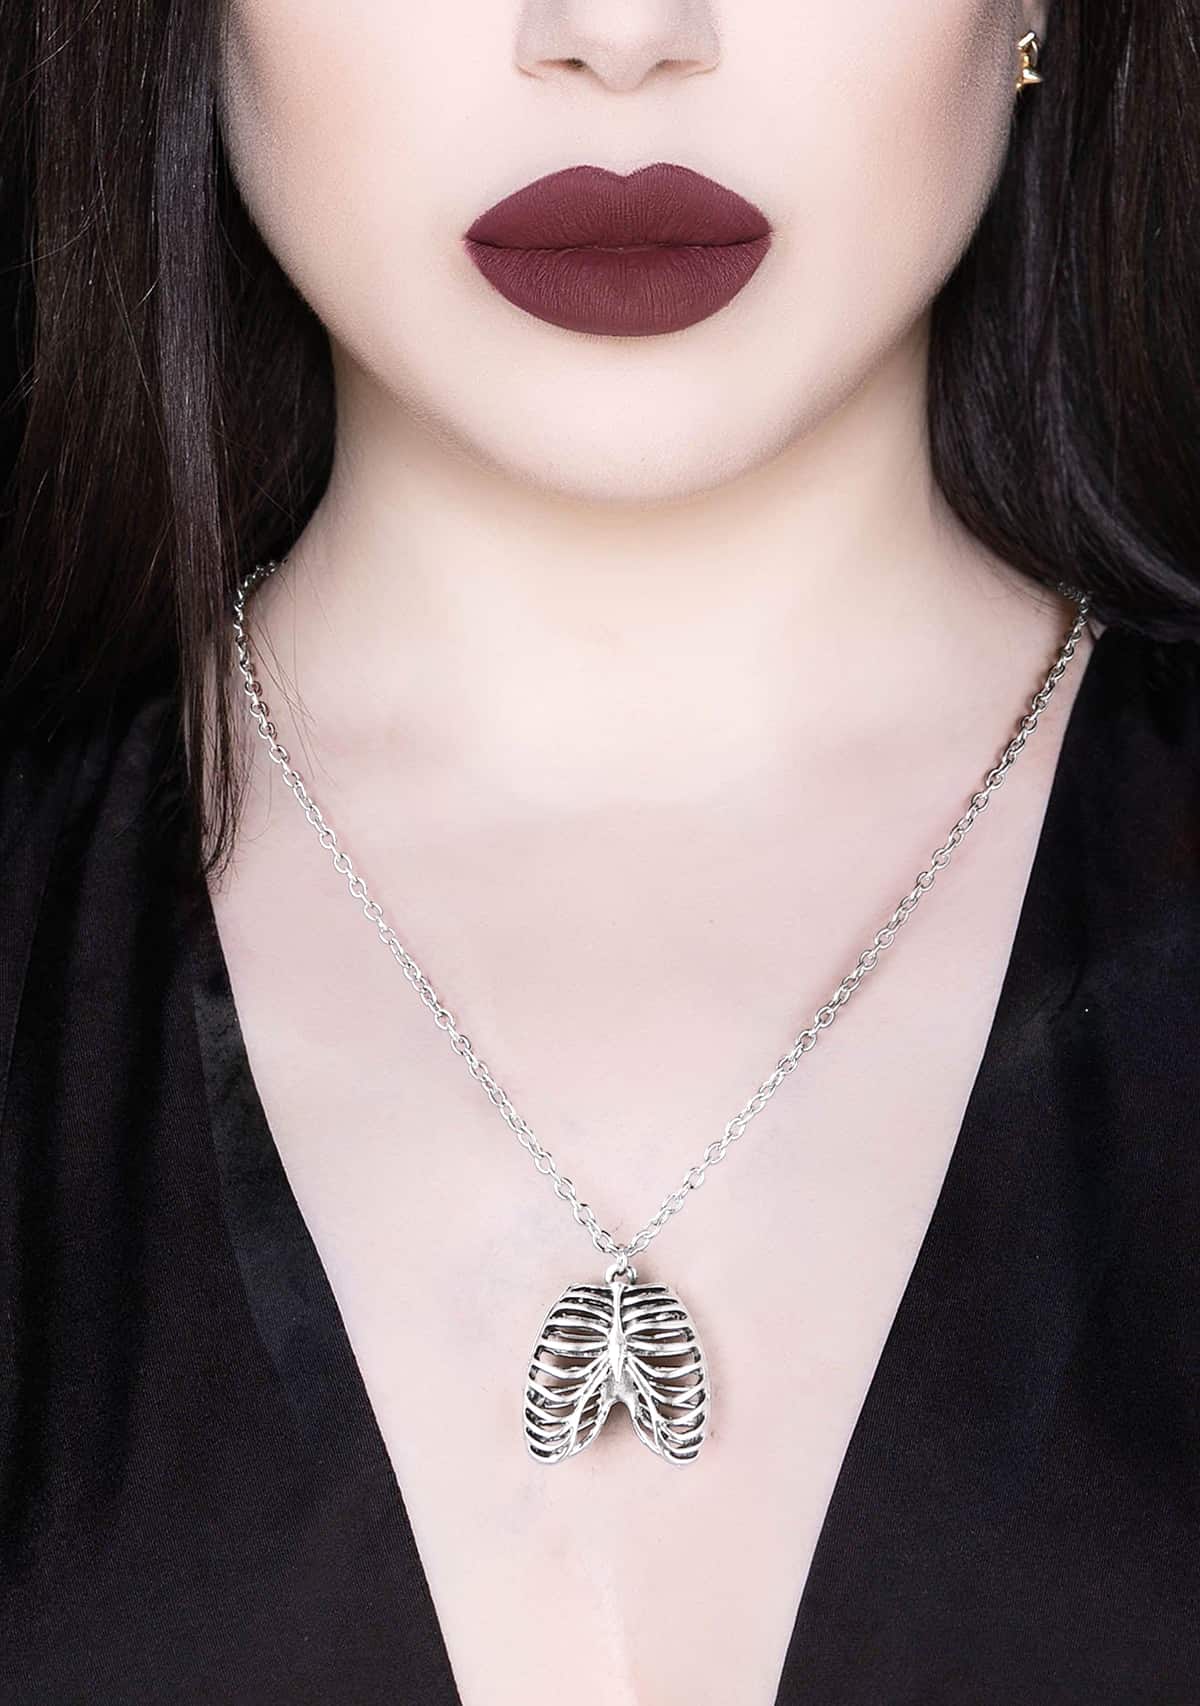 Gothic Dark Ribcage Sculpted Necklace